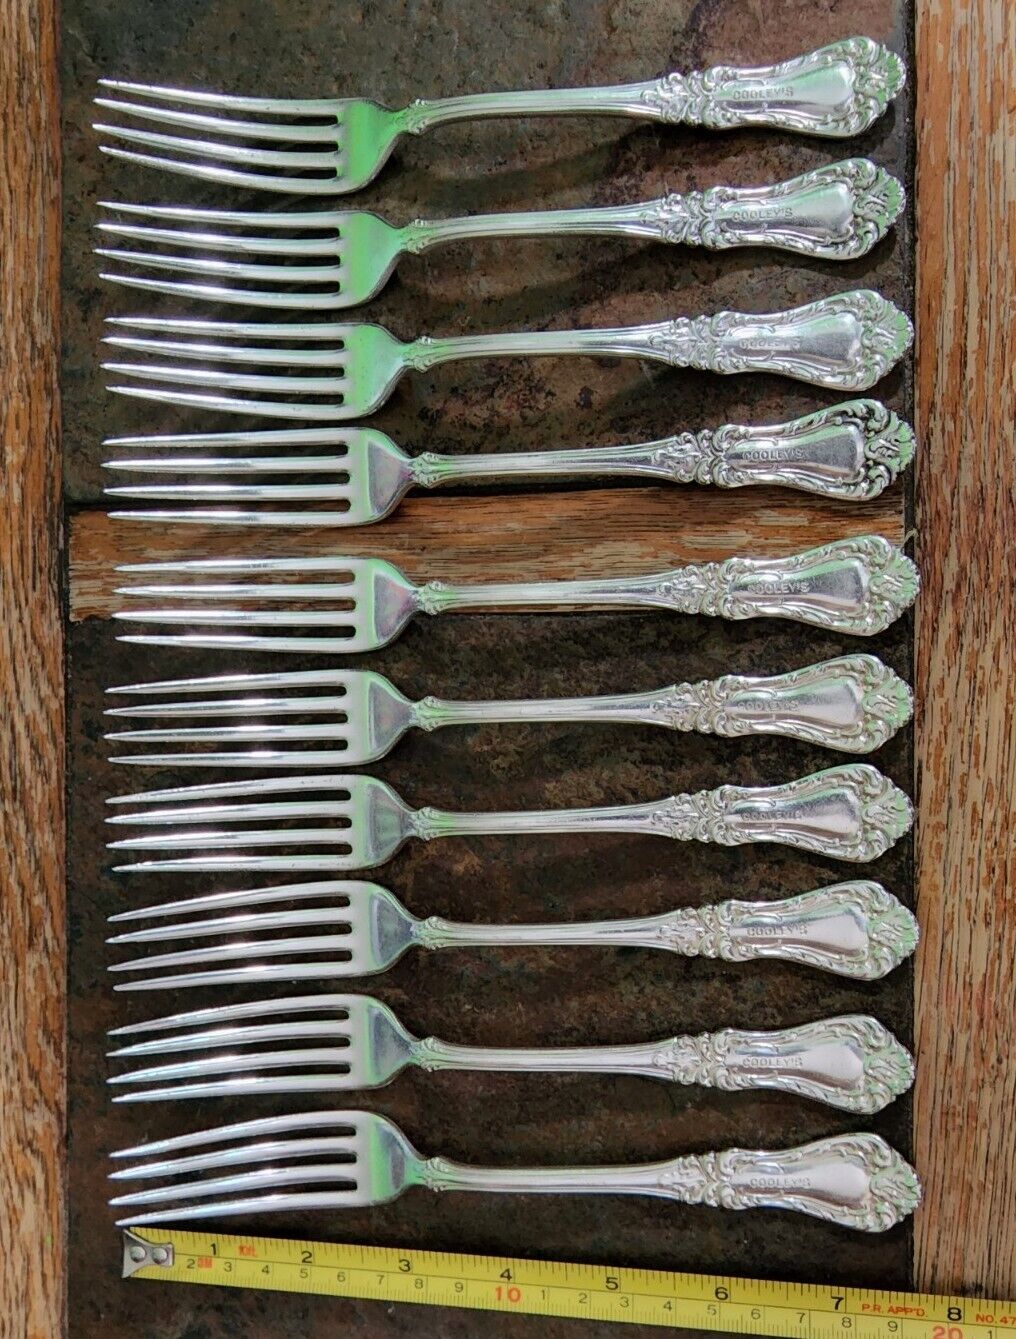 10 ANTIQUE c1901 LAKEWOOD SILVERPLATED COOLE\'Y RESTAURANT & PUB DINNER FORKS 😜 